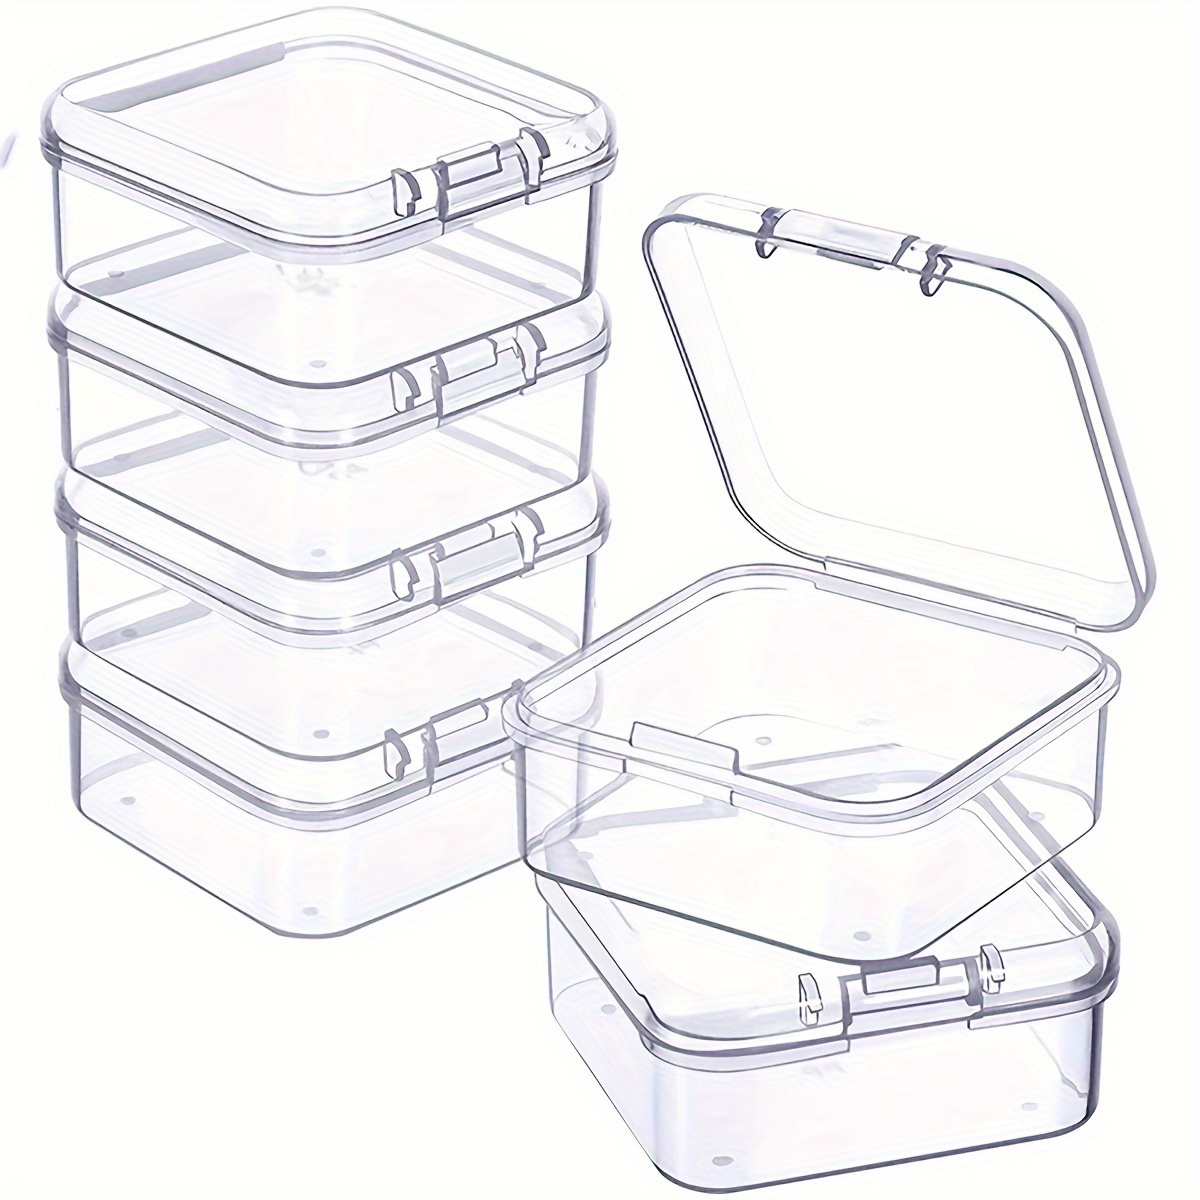 Rectangular Clear Small Plastic Containers Transparent Storage Box